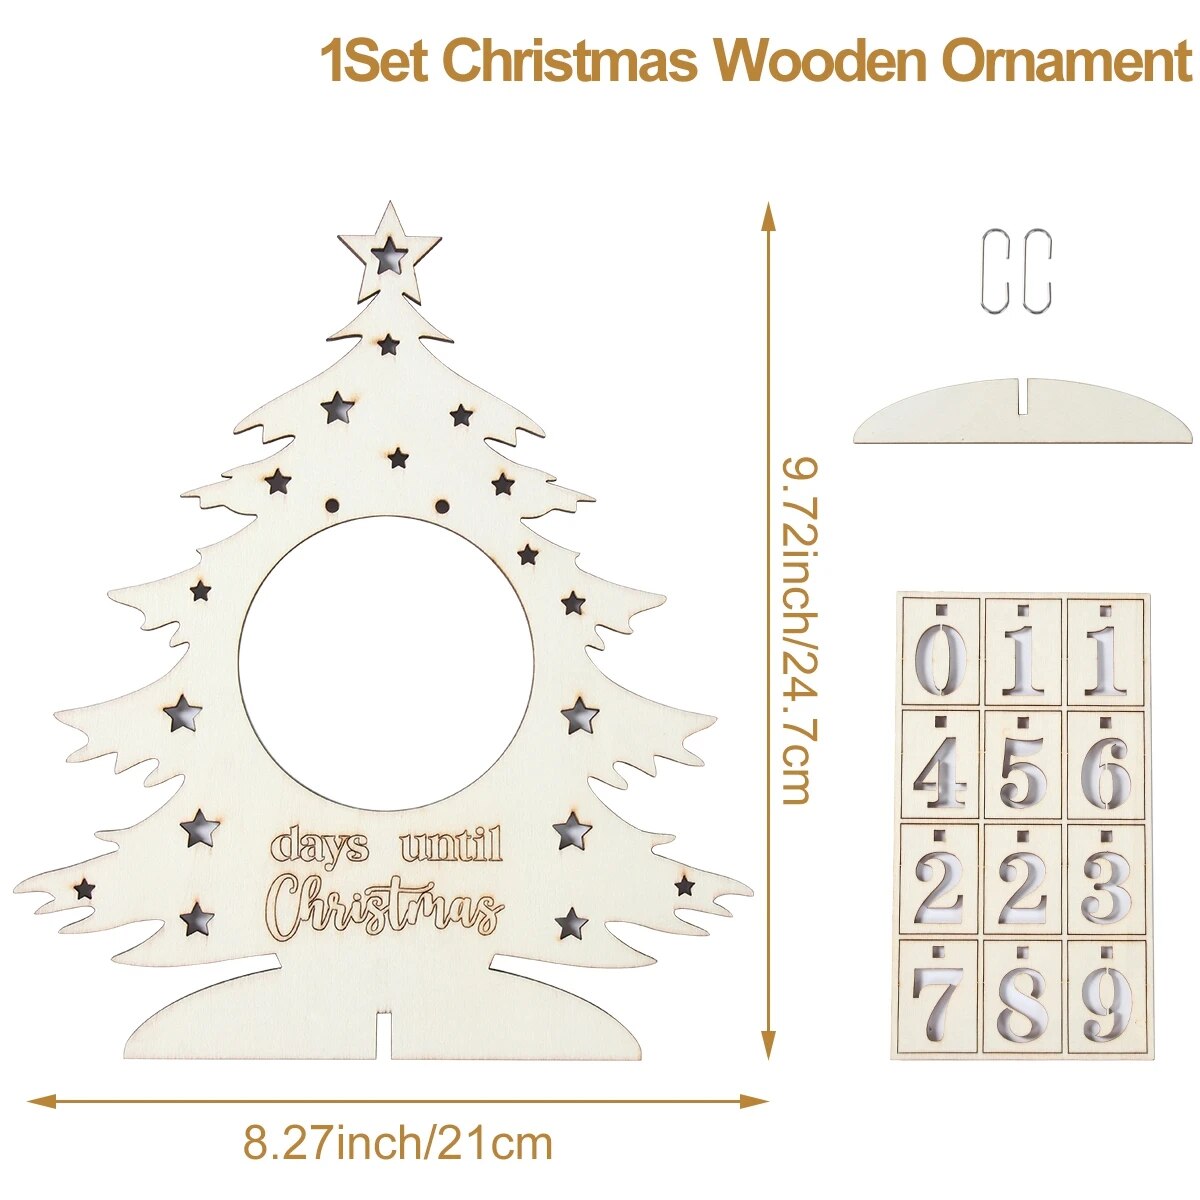 Wooden Xmas Tree House Advent Calendar: Countdown Table Ornament for Christmas Home Decor and New Year Presents